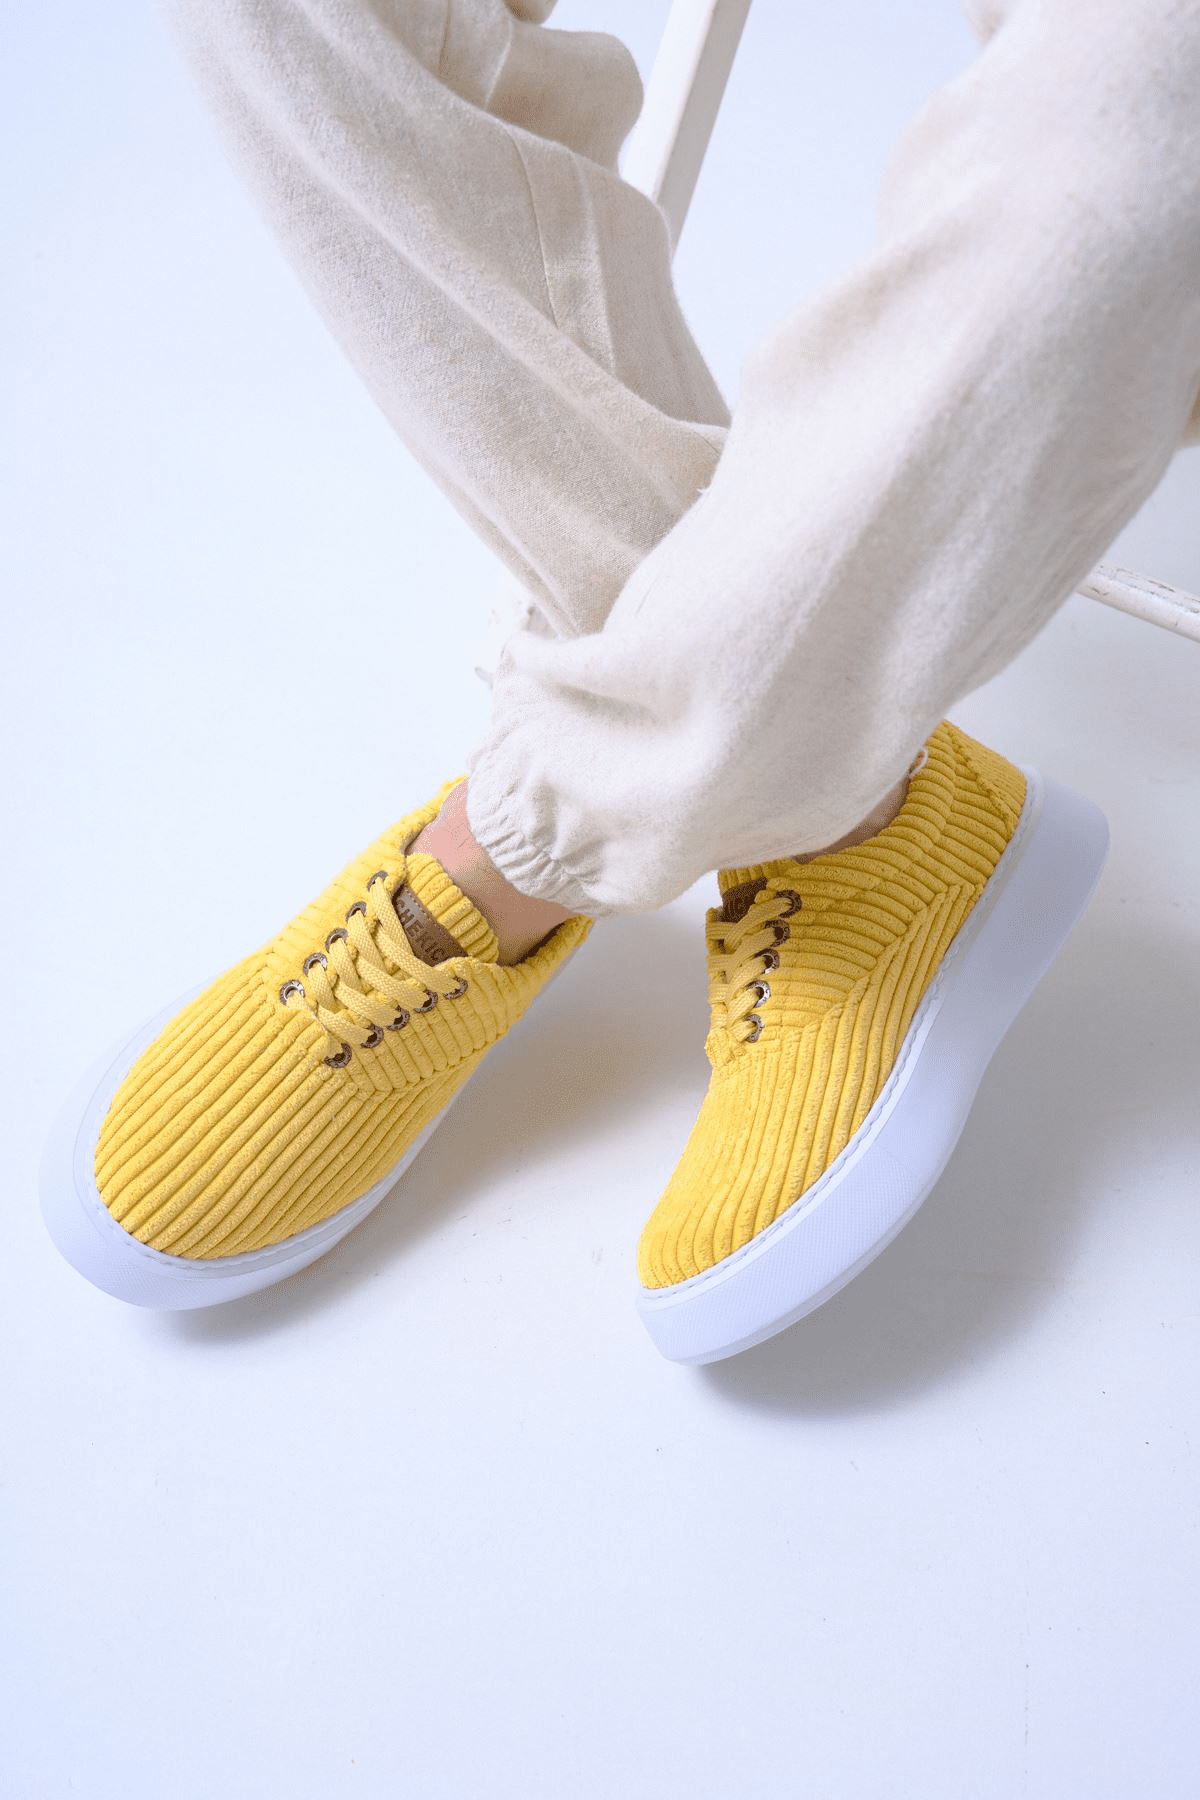 Chekich Casual Men's Shoes Black Color Lace-Up Knitting Fabric Material Comfortable Use Summer Spring Season Sneakers CH173 ST